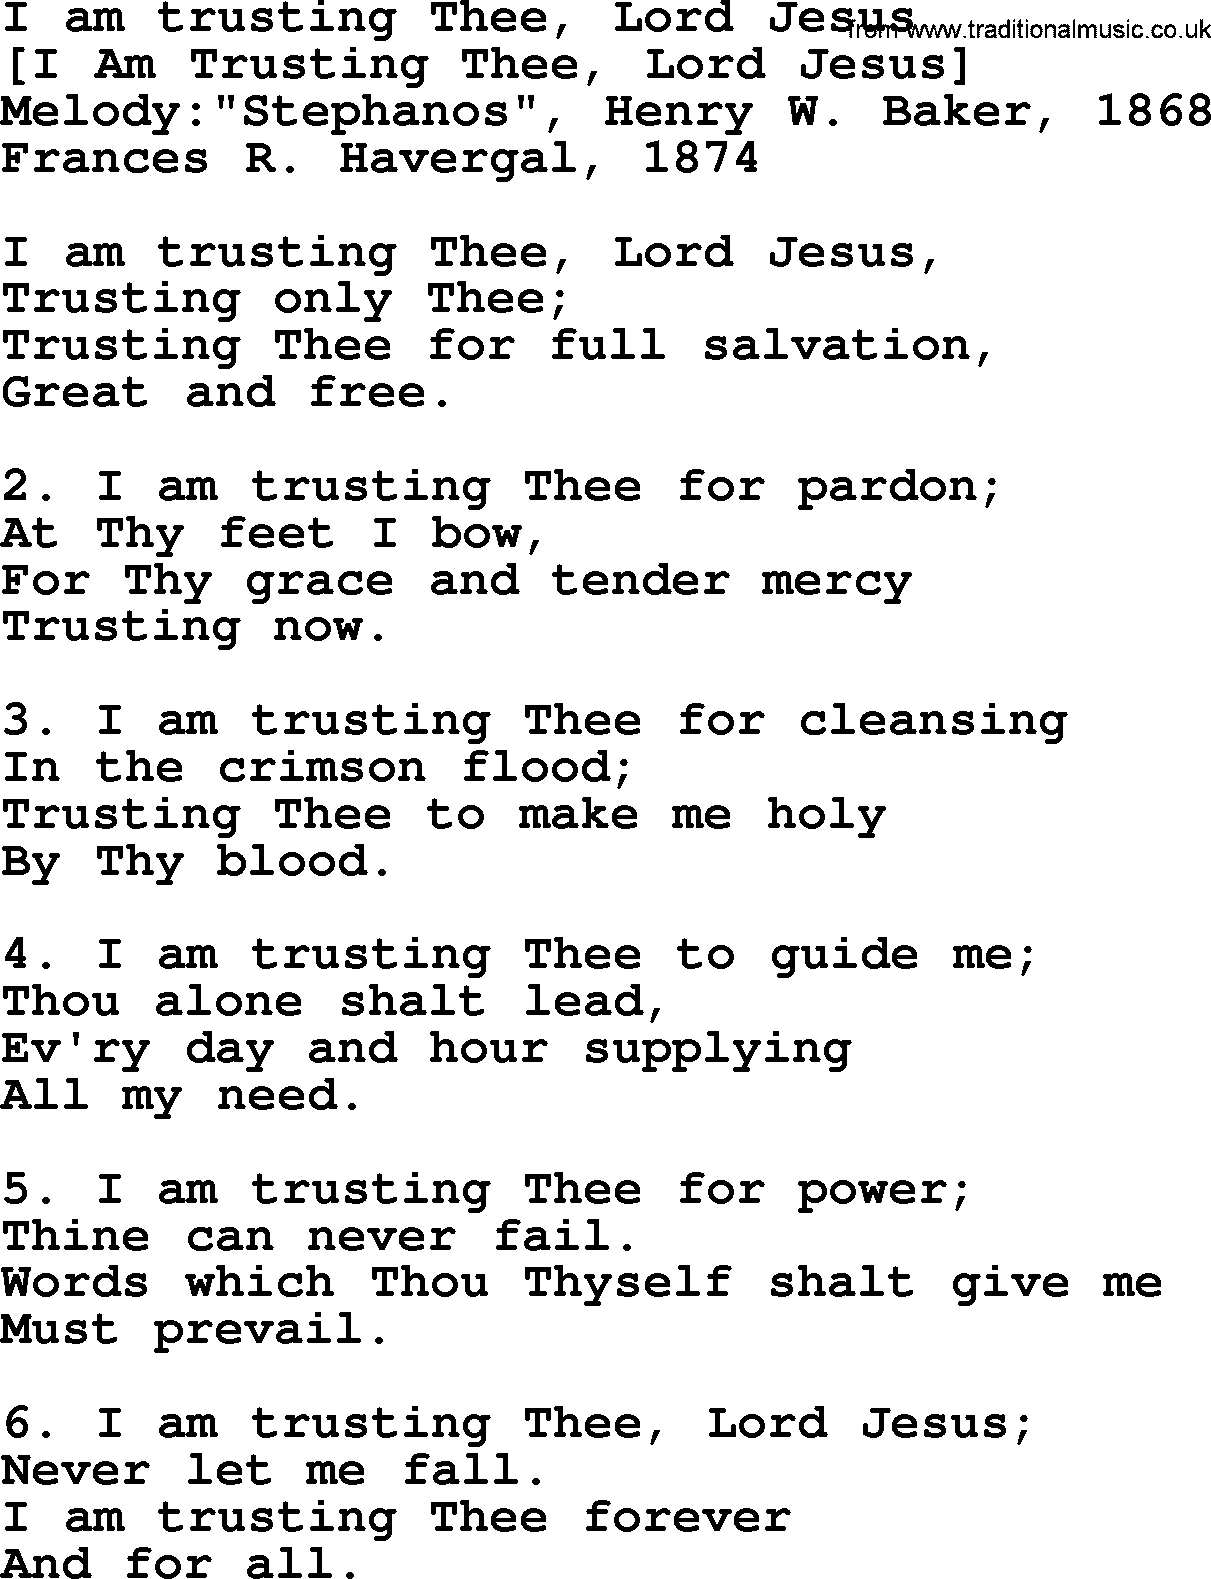 Old English Song: I Am Trusting Thee, Lord Jesus lyrics